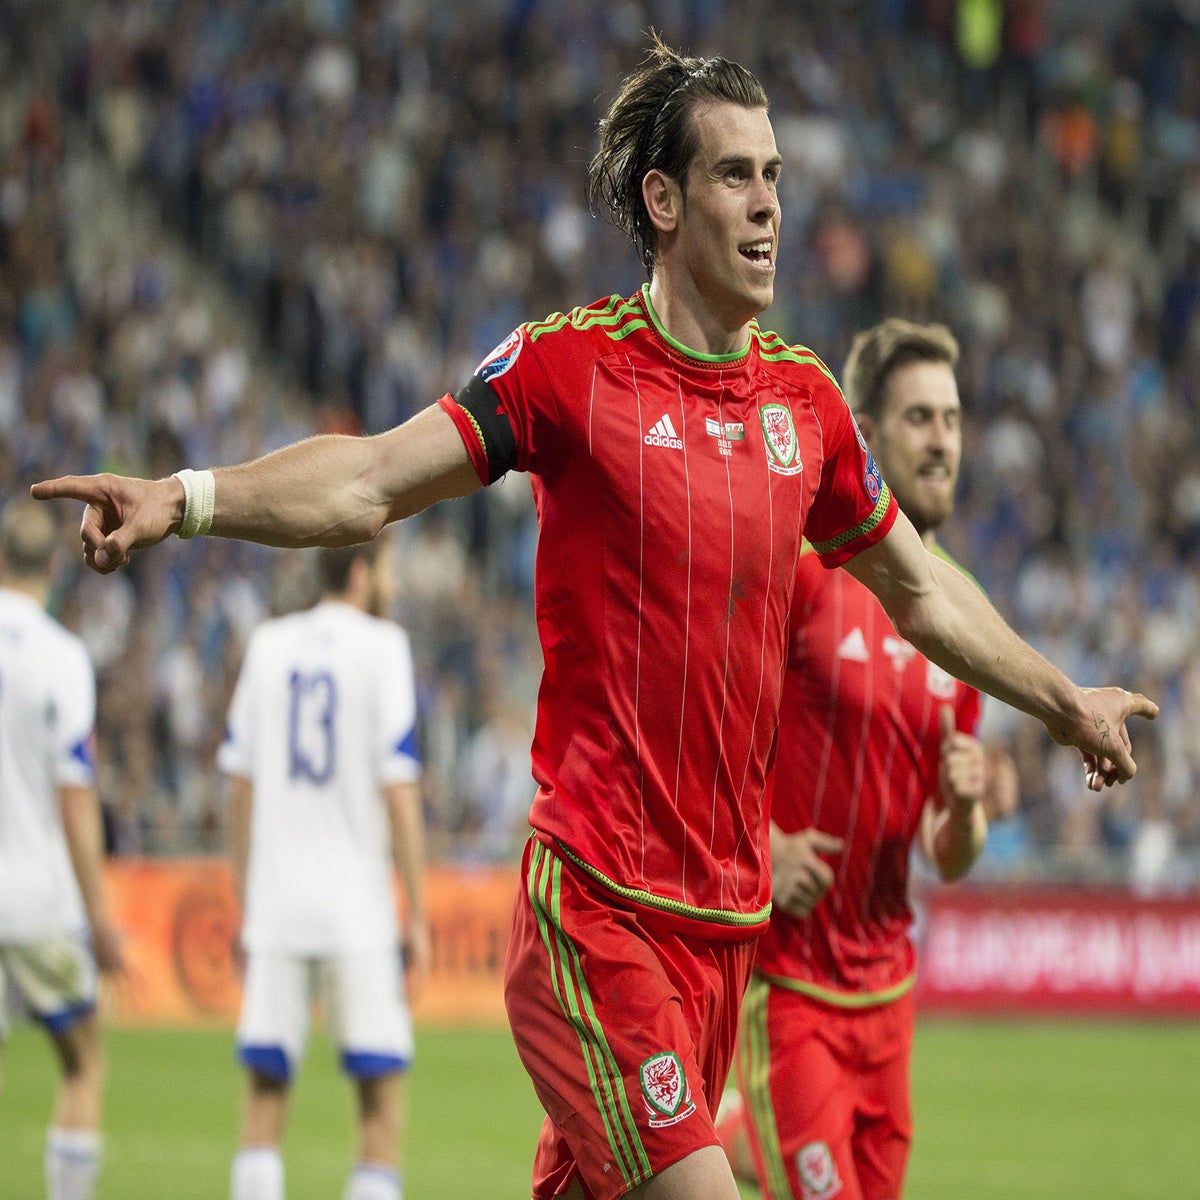 Gareth Bale and Aaron Ramsey will 'answer critics' to perform in